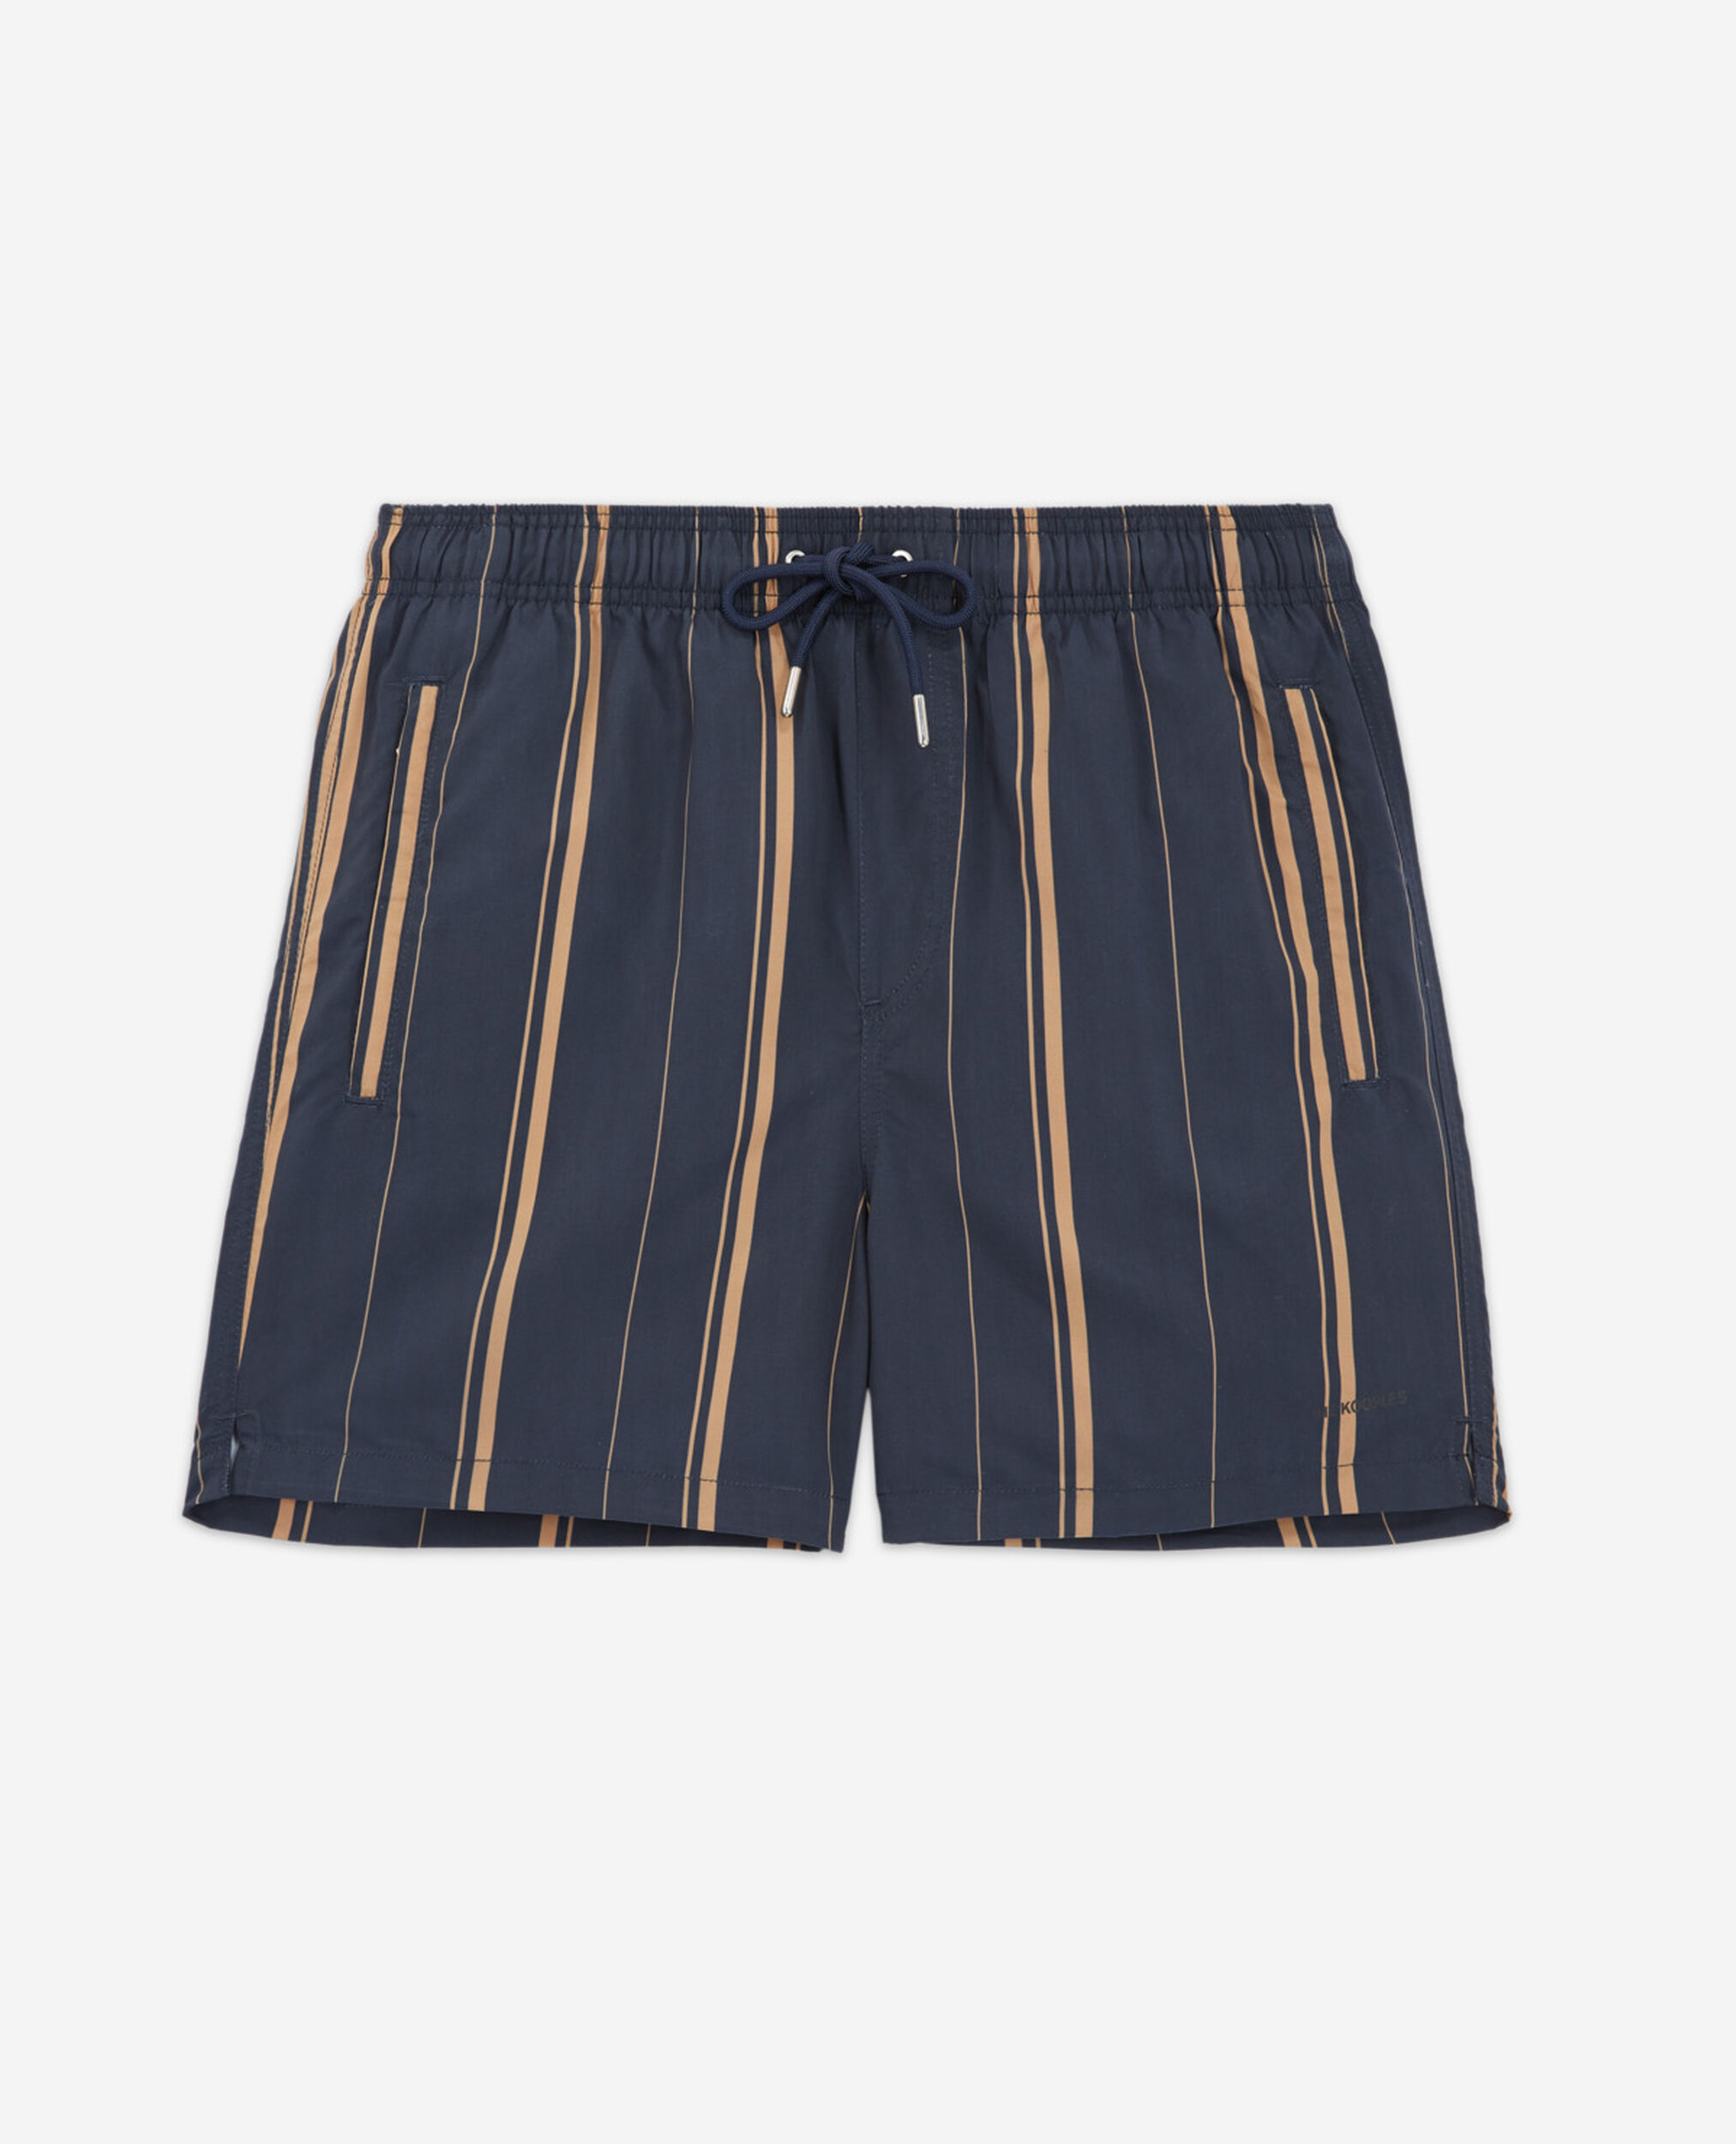 Navy blue swim shorts with contrasting logo, NAVY, hi-res image number null